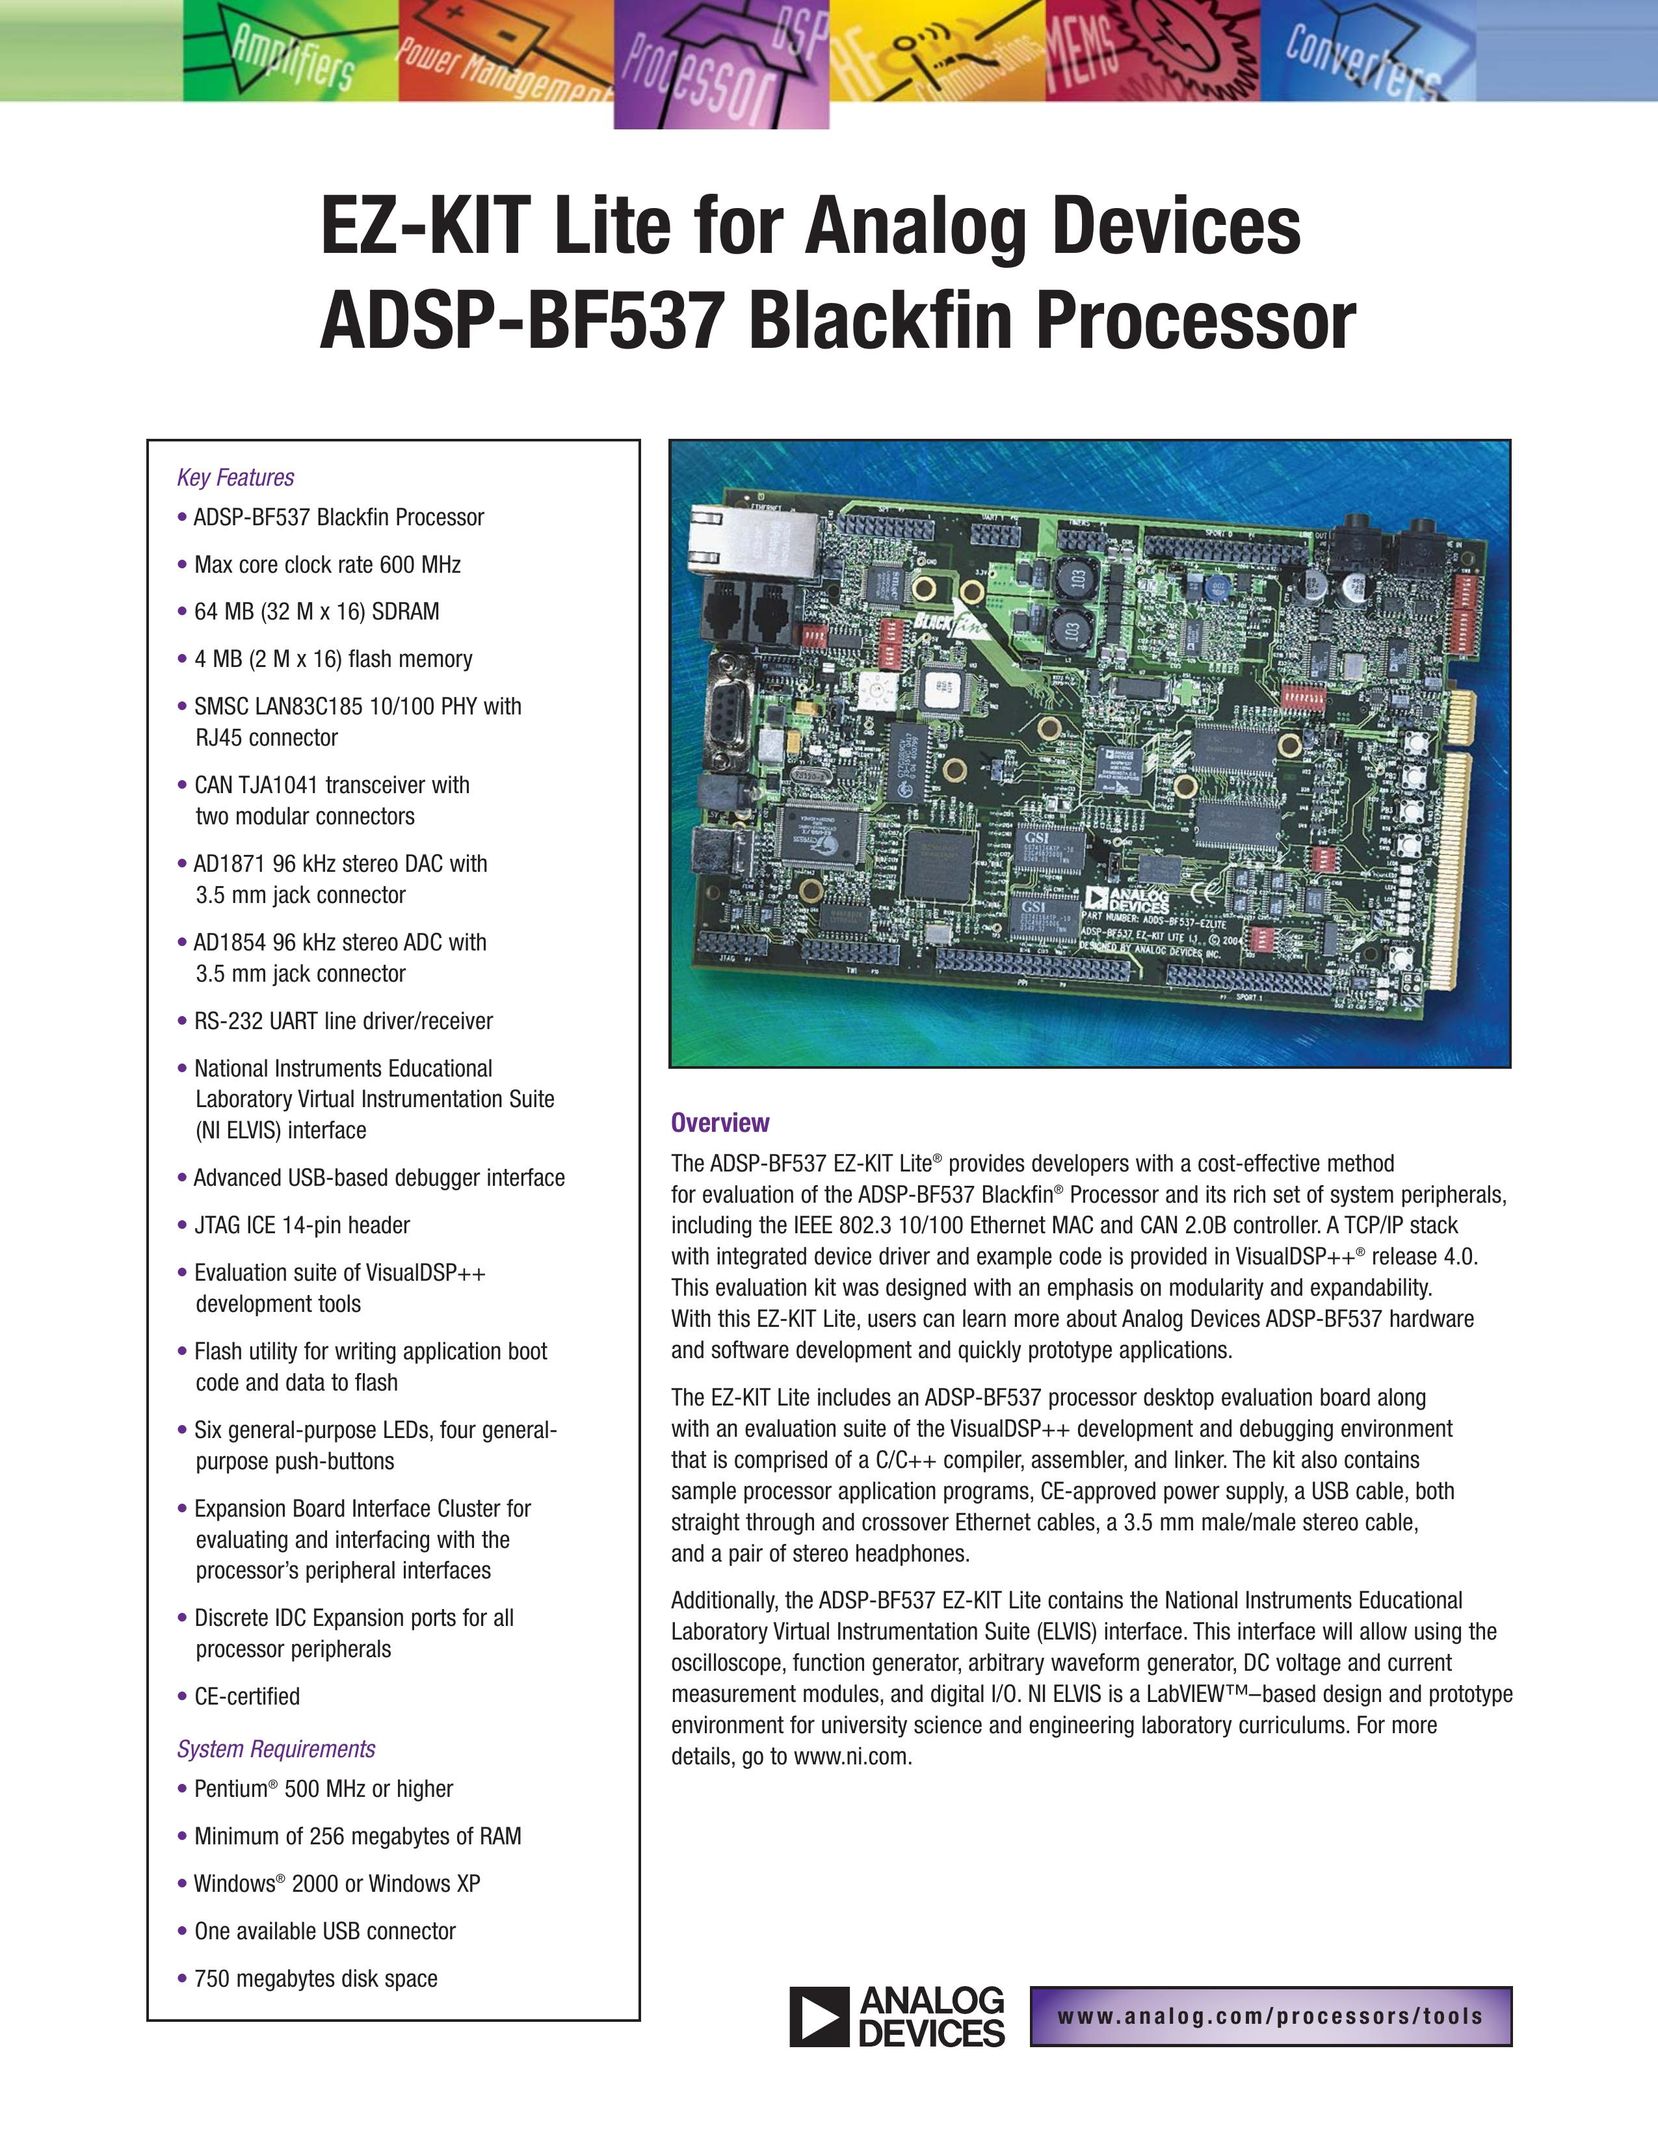 Analog Devices ADSP-BF537 Computer Hardware User Manual